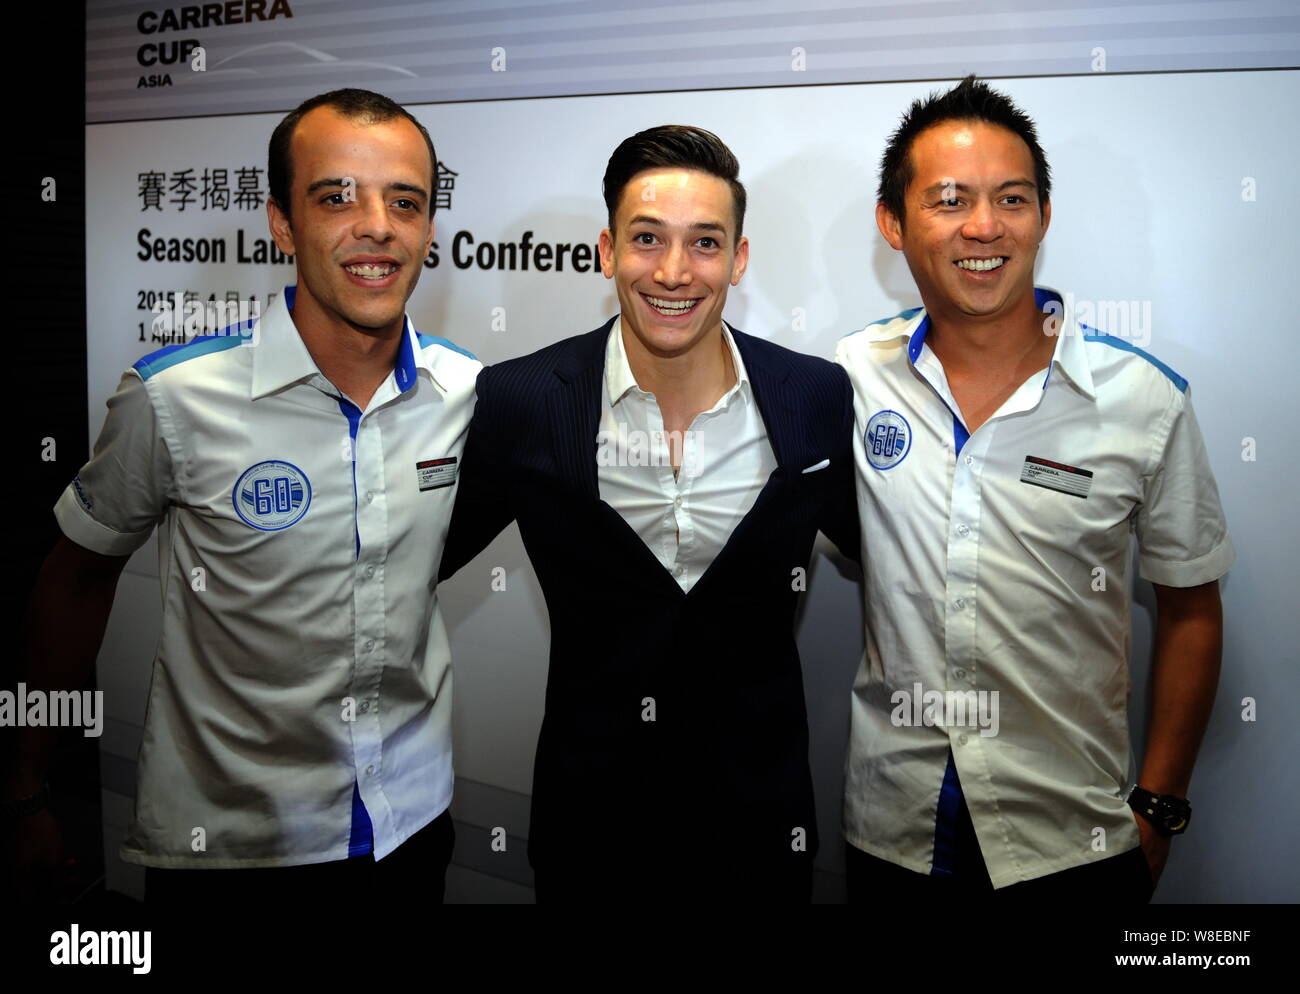 German gymnast Marcel Nguyen, center, poses during a press conference for the 2015 Porsche Carrera Cup Asia season in Hong Kong, China, 1 April 2015. Stock Photo